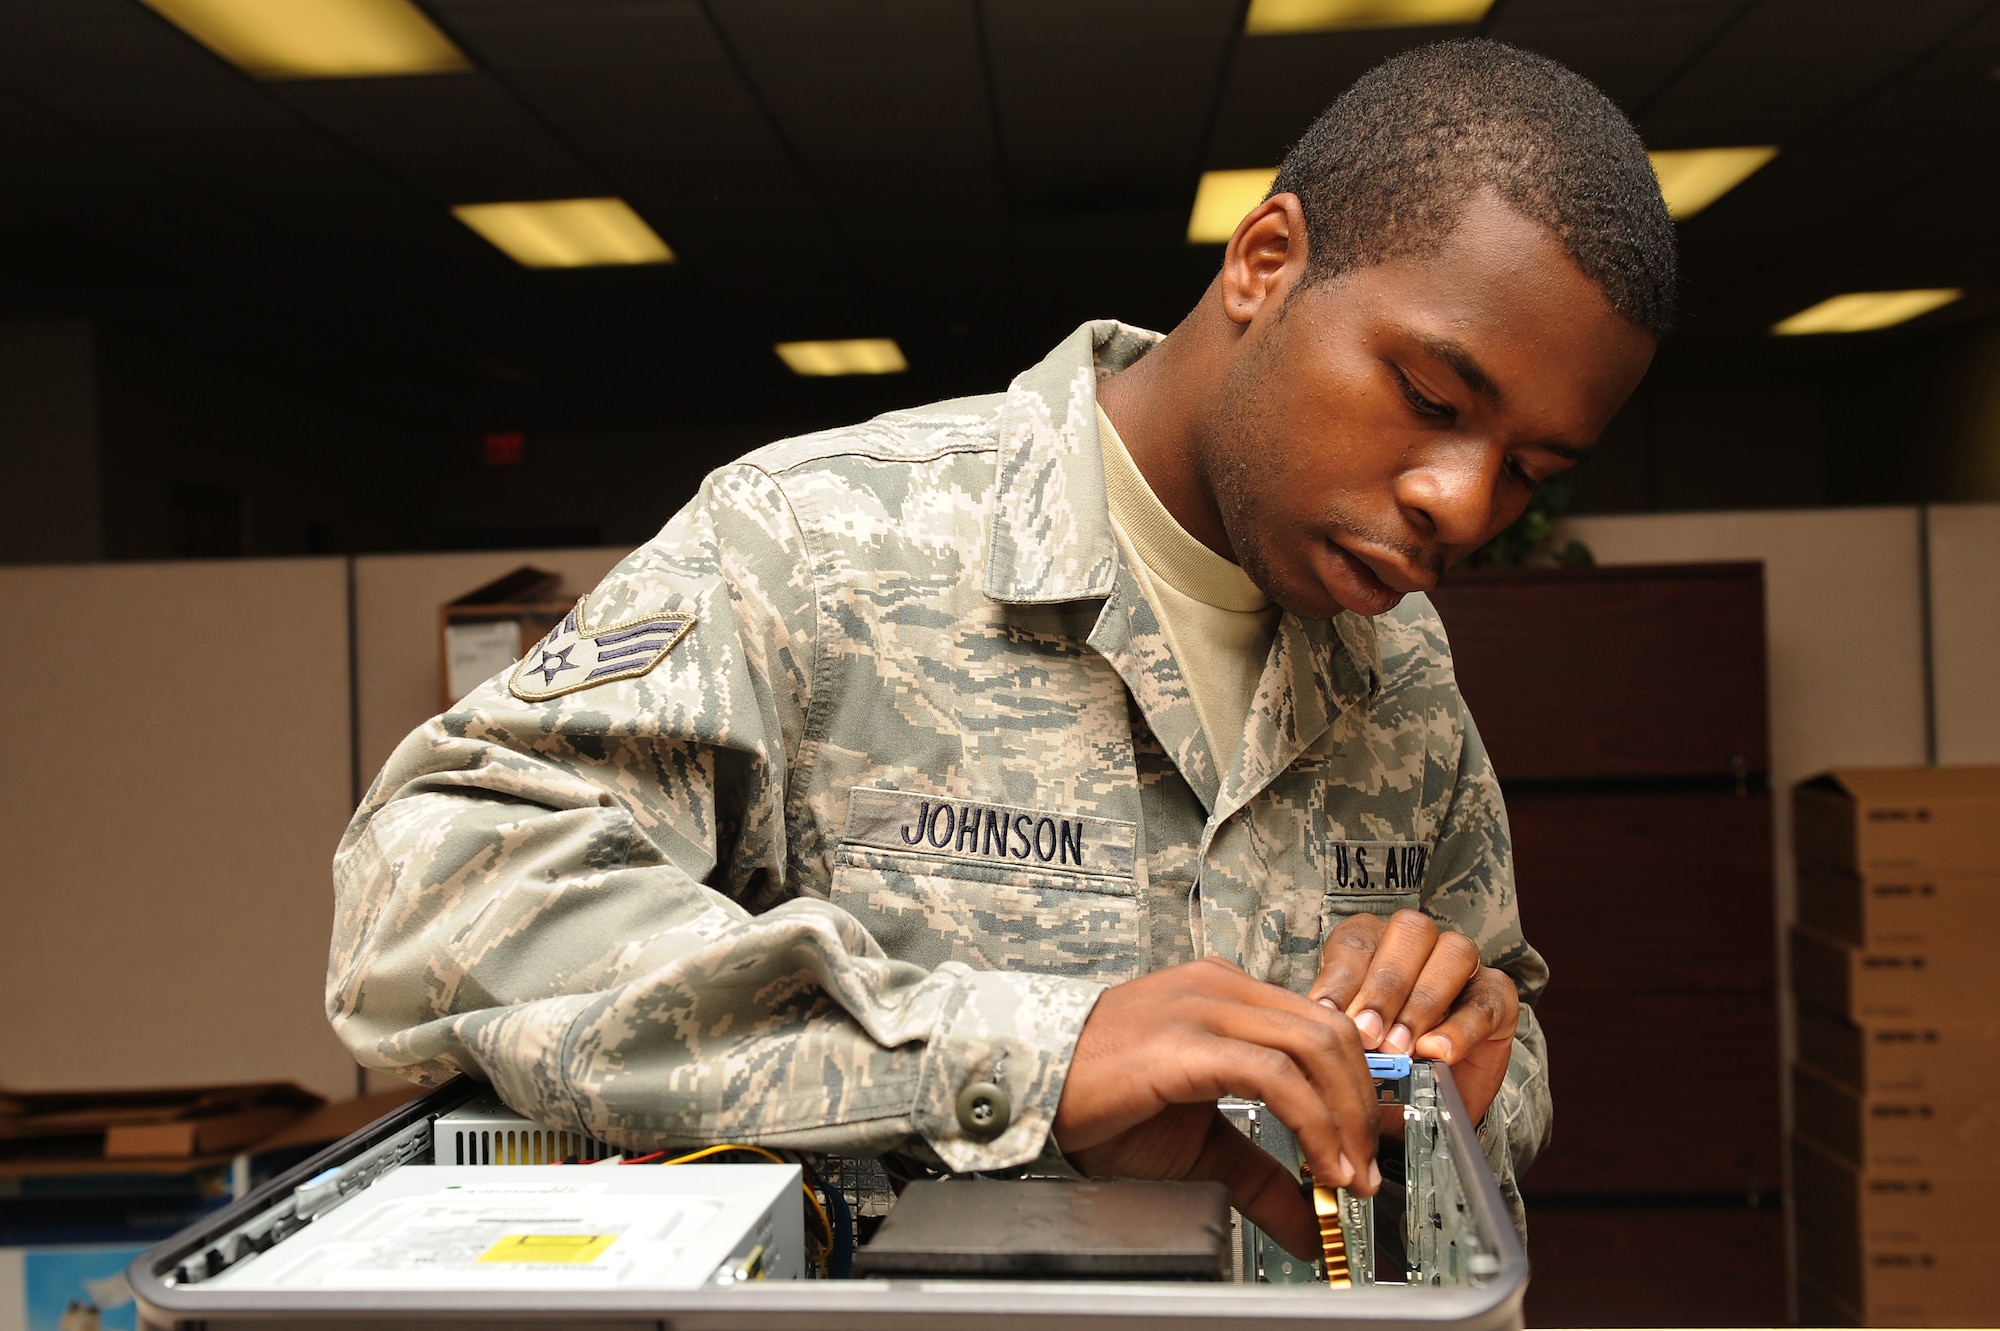 Senior Airman Nathaniel Johnson III, 4th Communications Squadron client support administrator, inserts a video card into computer processing unit on Seymour Johnson Air Force Base, N.C., Oct. 1, 2009. Without a video card images cannot be shown on a computer screen. (U.S. Air Force photo/Airman 1st Class Whitney Lambert)